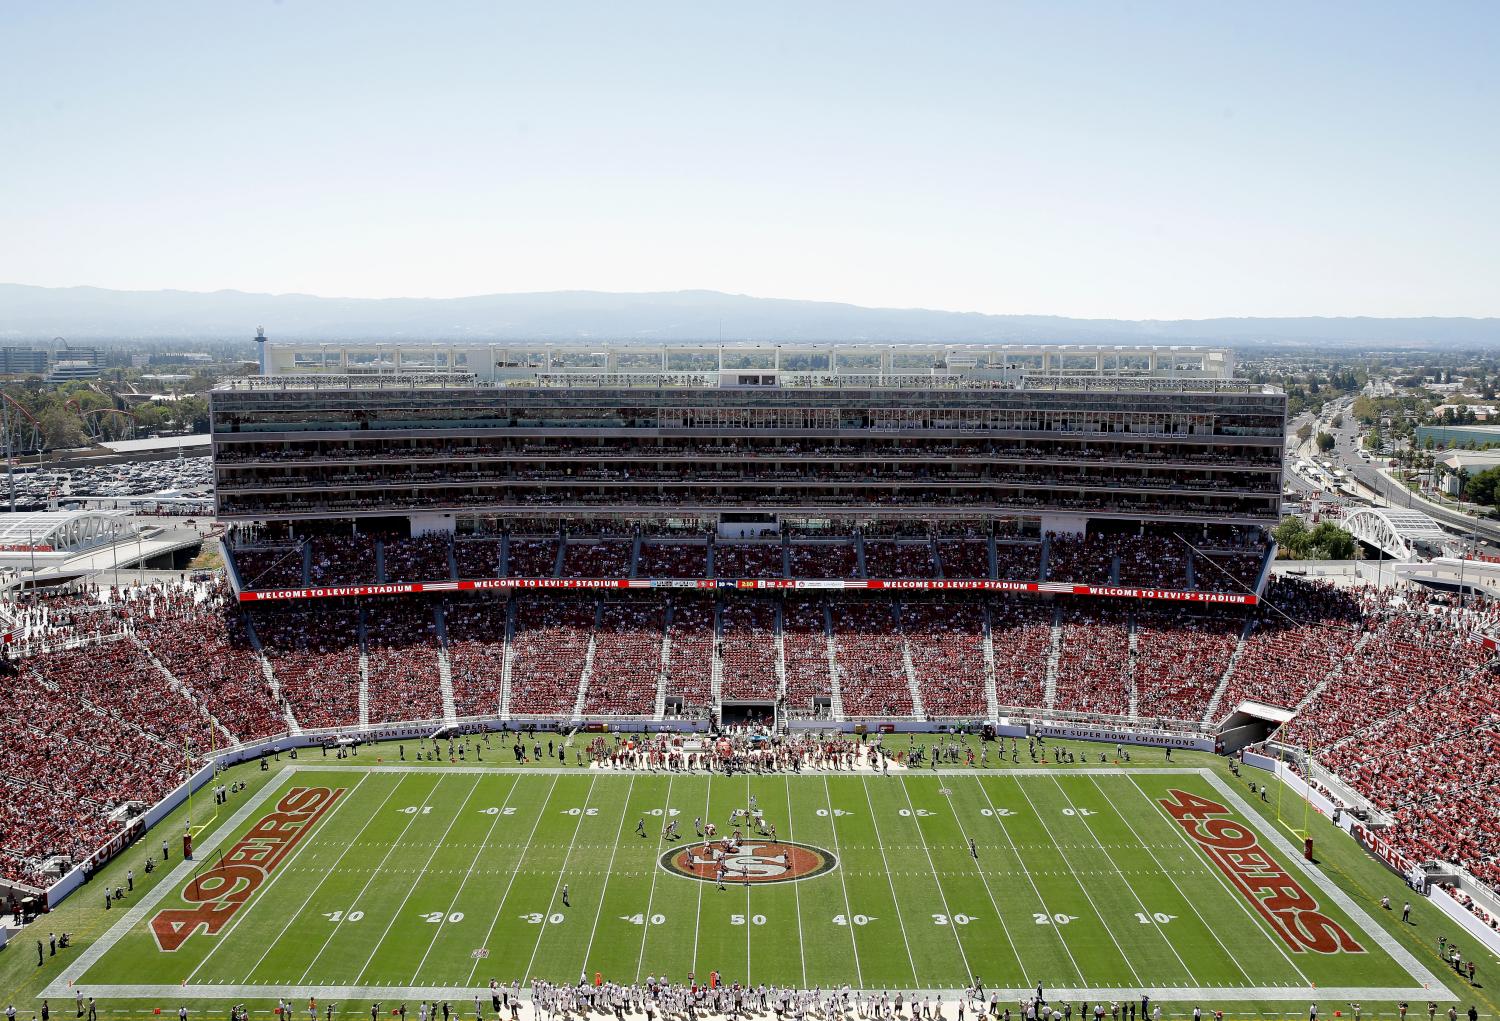 A general view during a preseason game between the San Francisco 49ers and Denver Broncos at Levi's Stadium on August 17, 2014 in Santa Clara, California (Ezra Shaw / Getty Images)